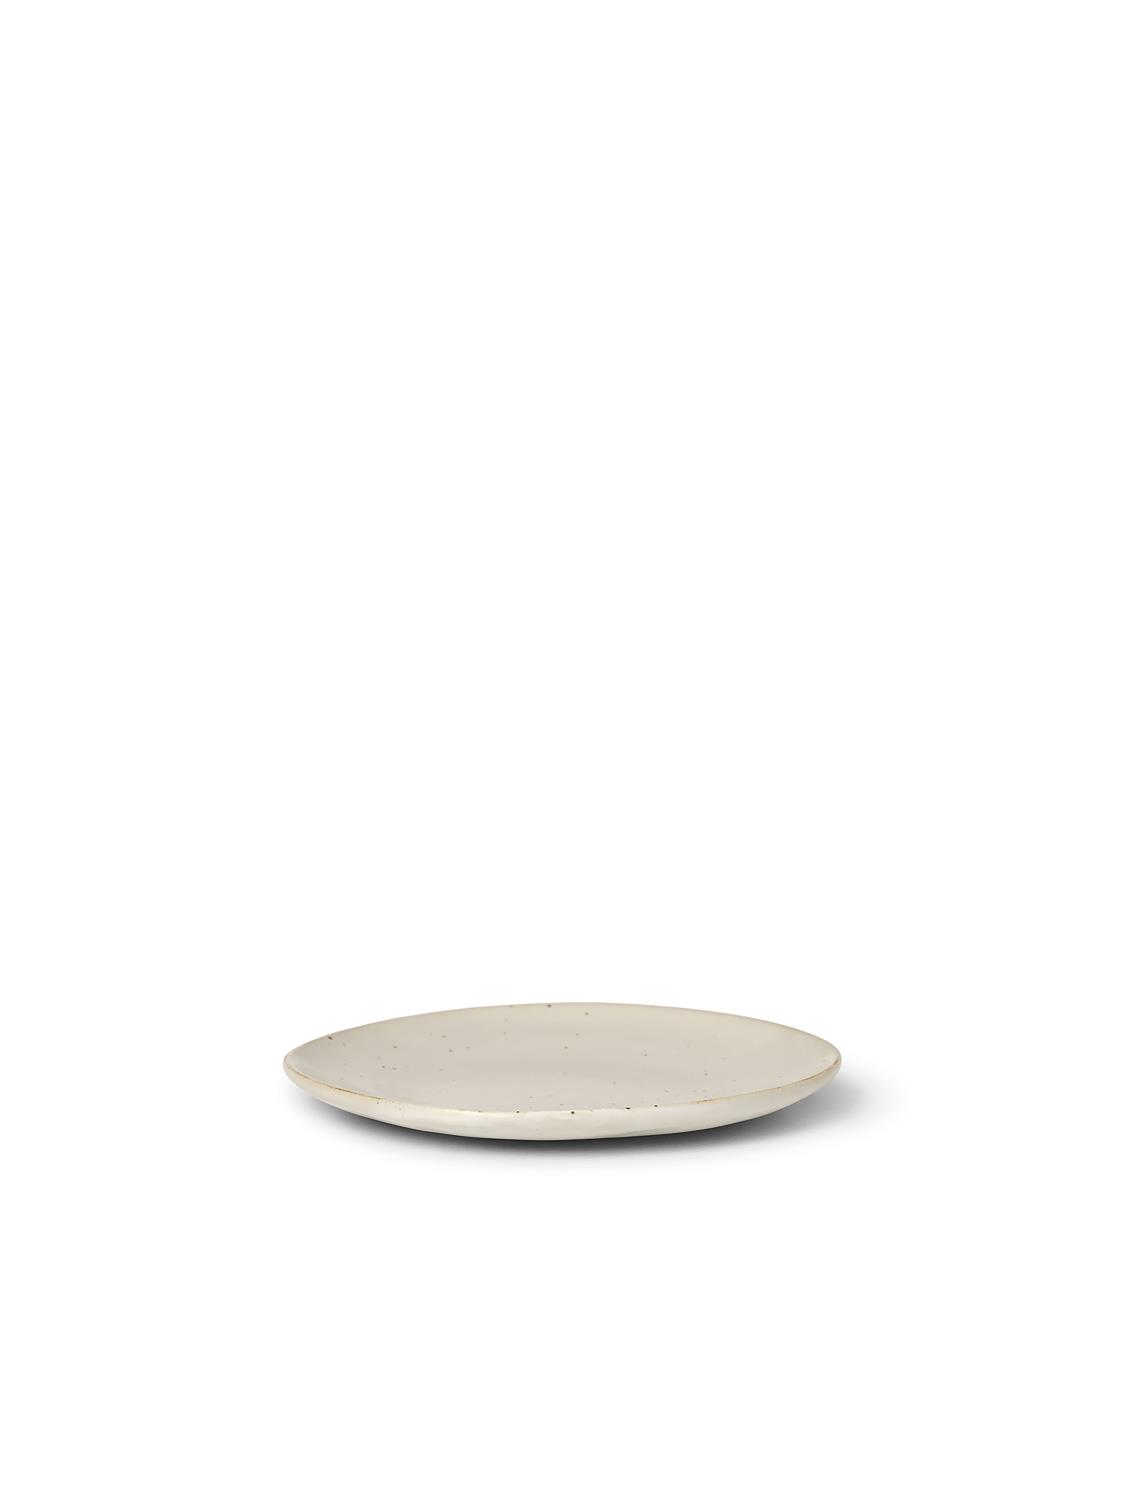 Ferm Living - Flow Plate - Off White Speckle - Small